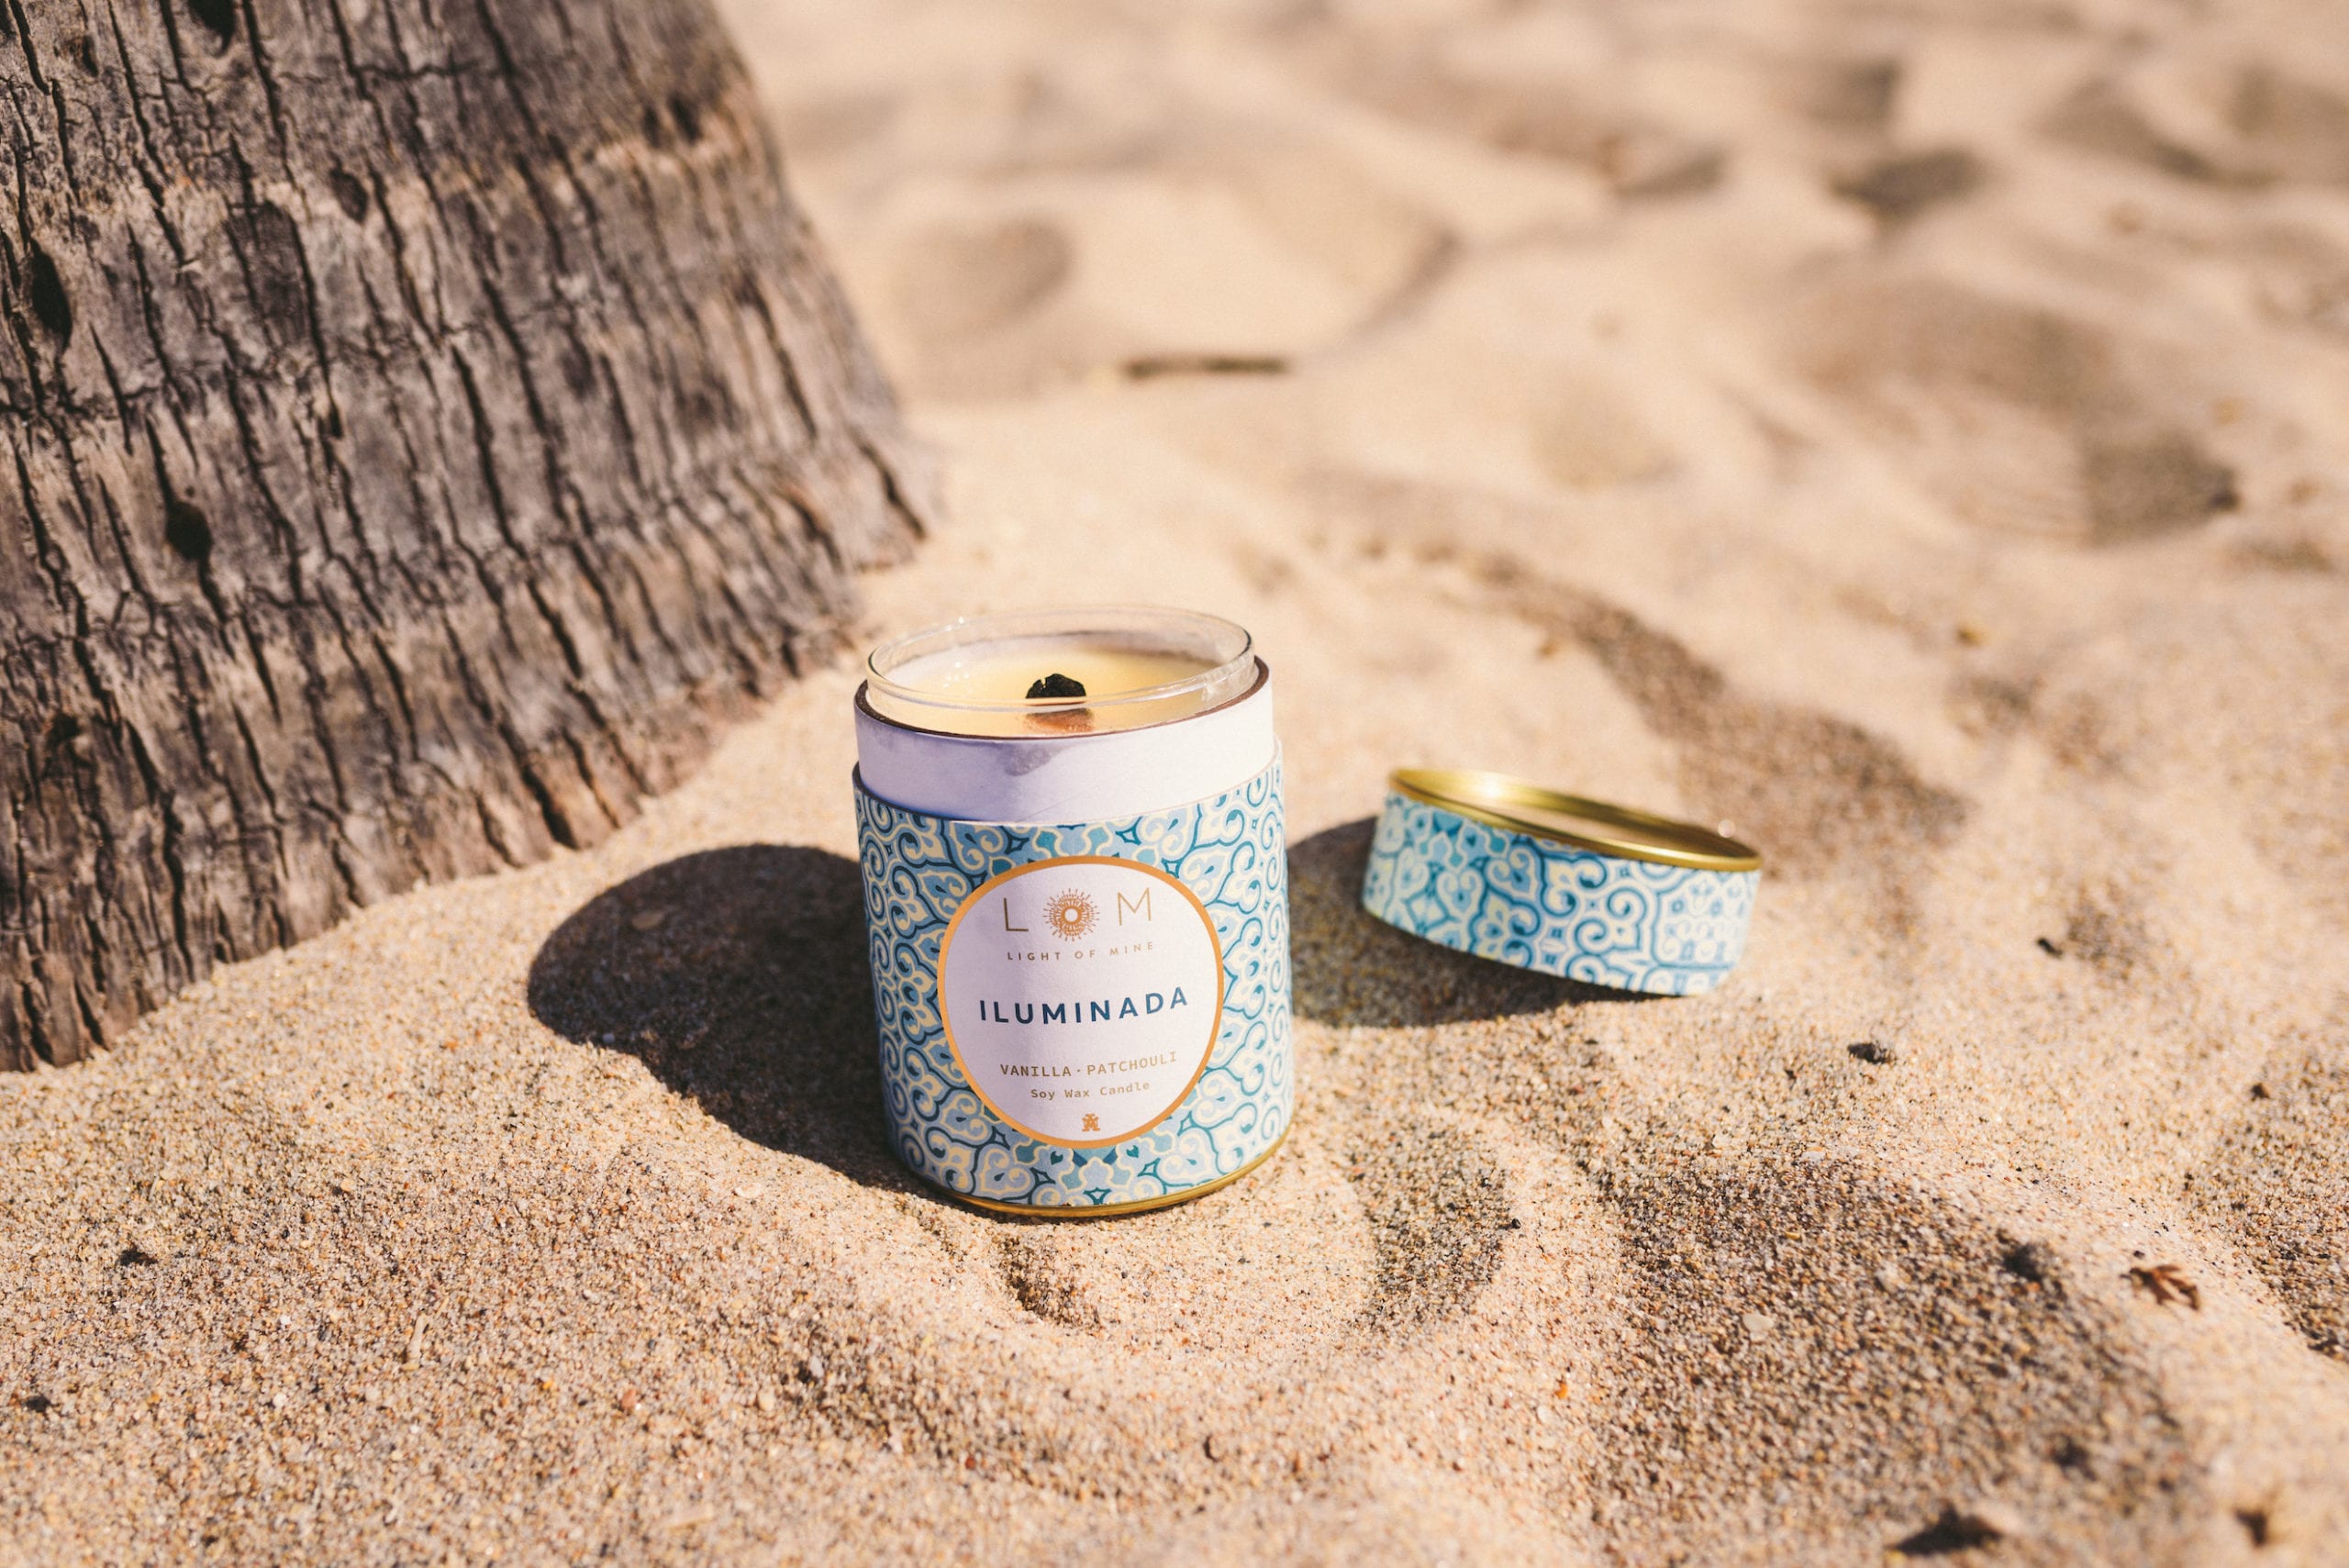 LOM Light of Mine Vanilla Patchouli candle in the sand next to lid with palm tree trunk in background